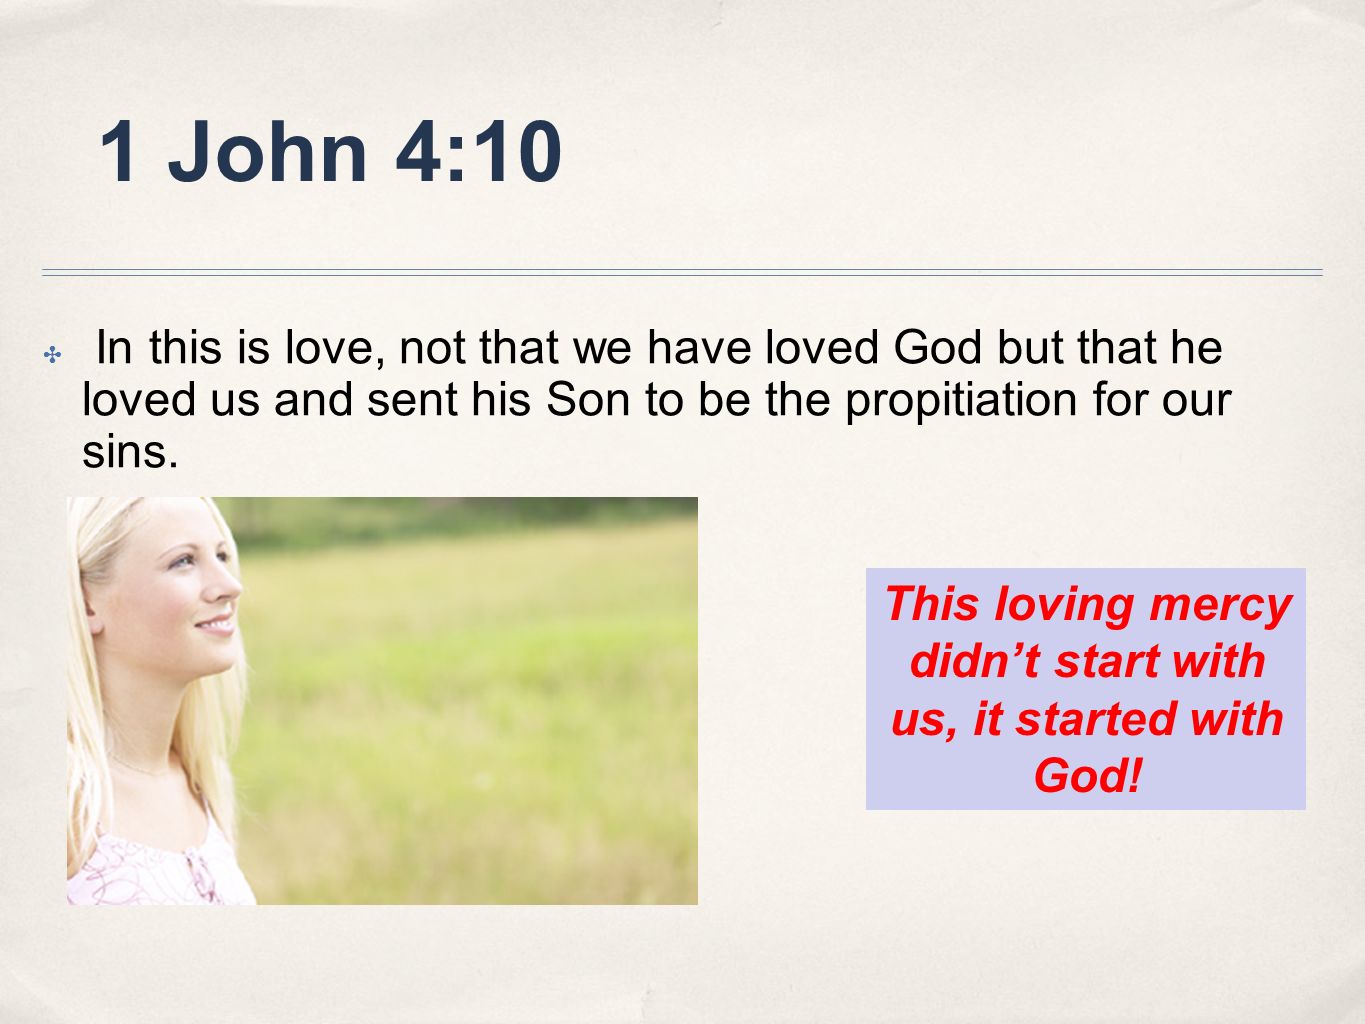 This loving mercy didn’t start with us, it started with God!